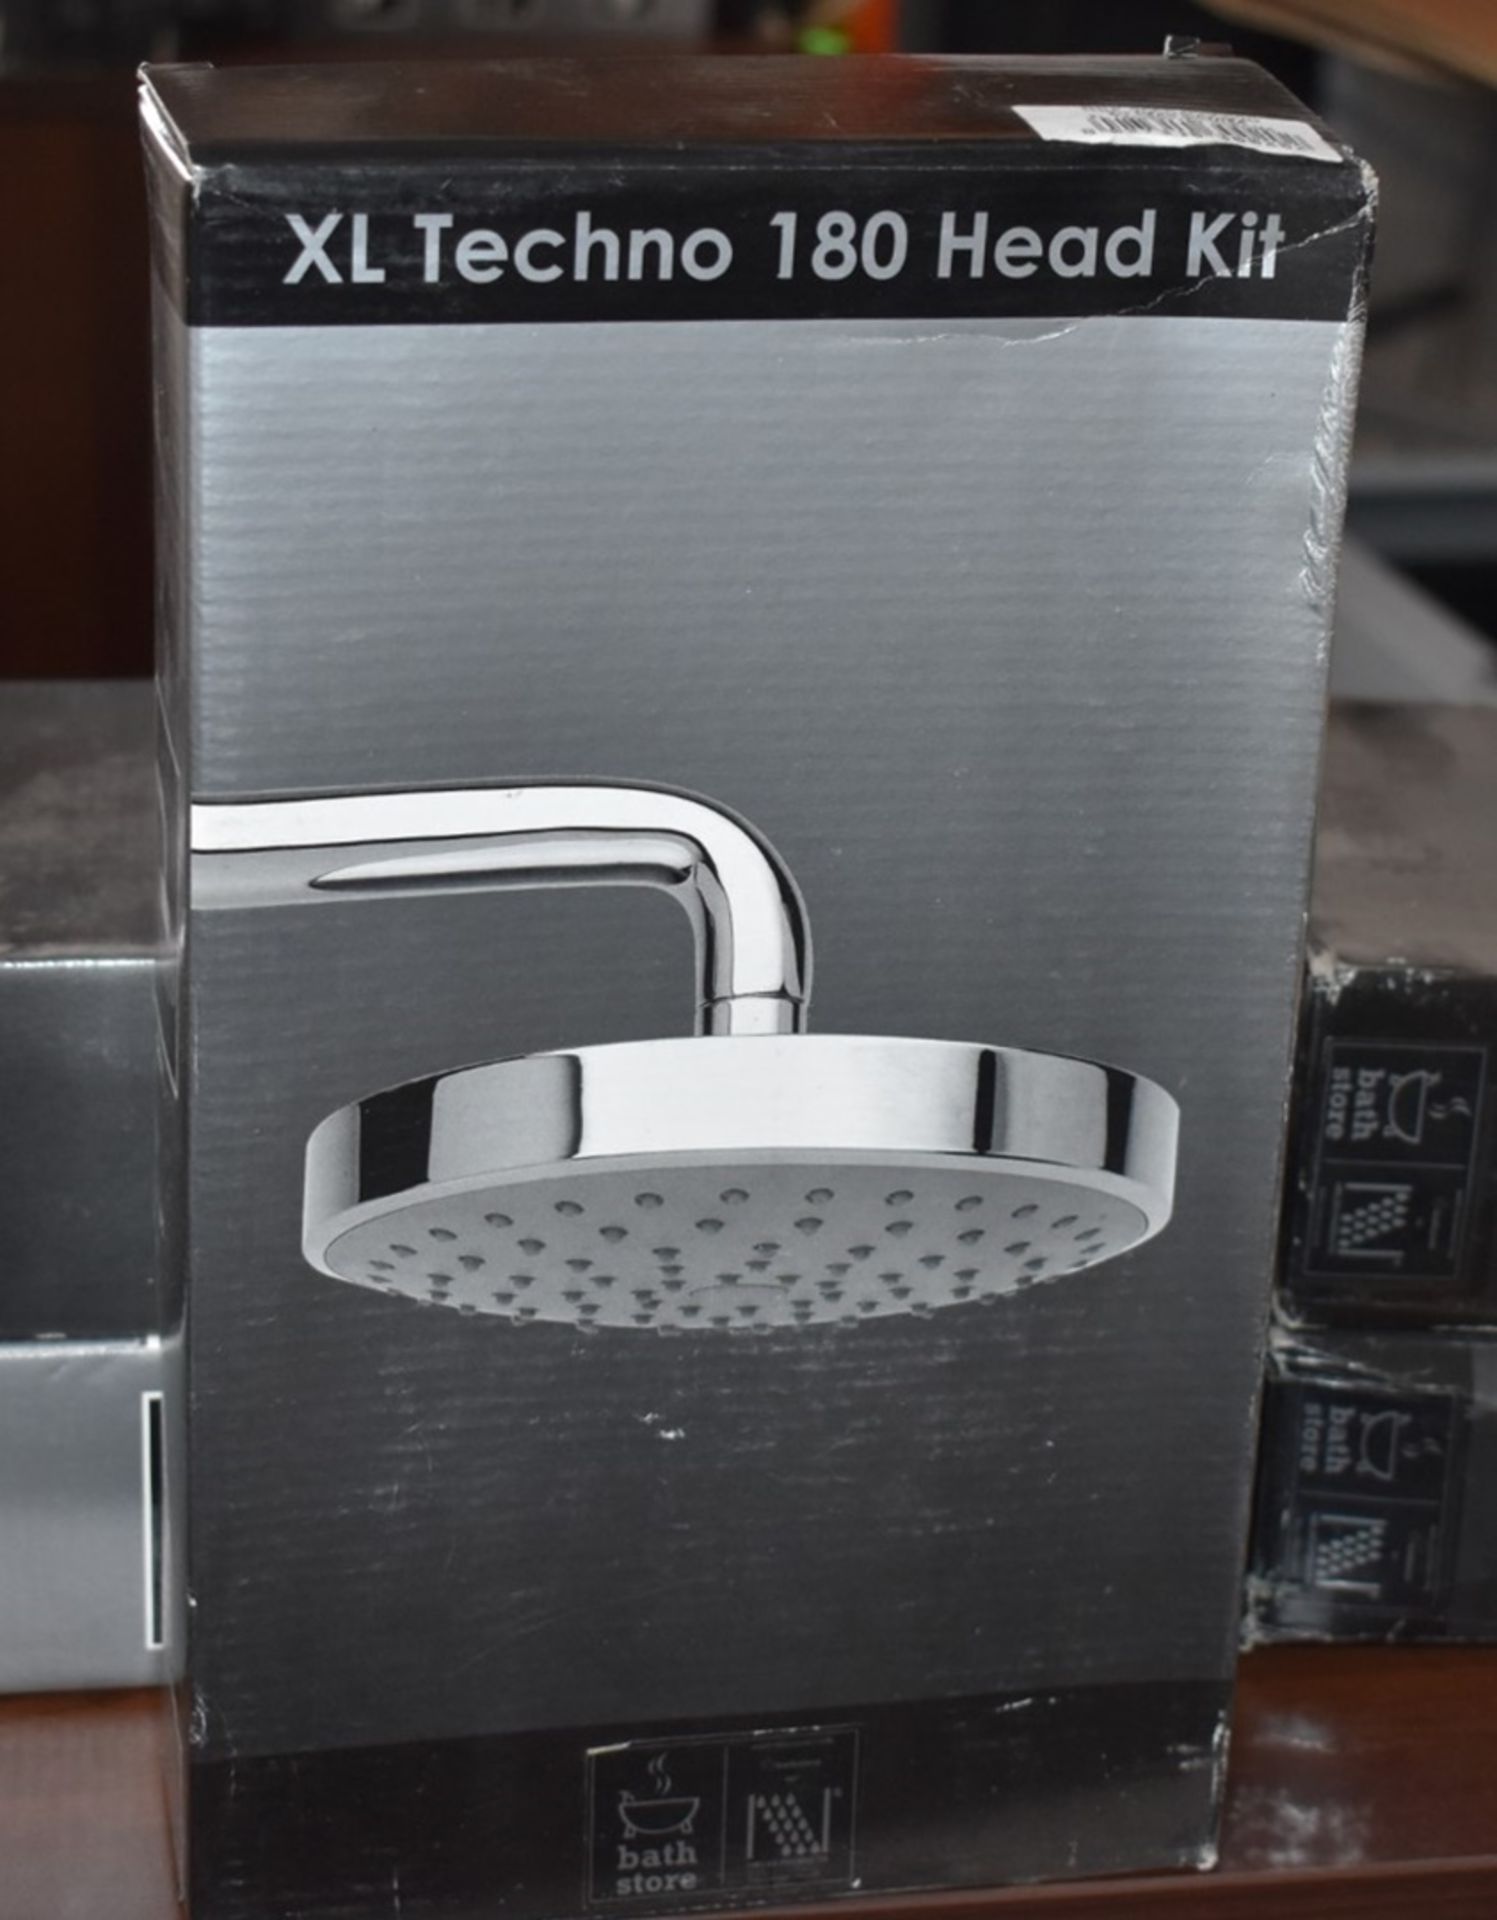 3 x Bathstore XL Techno 180 Shower Head Kits - Brass With Chrome FInish - New and Boxed - CL011 -